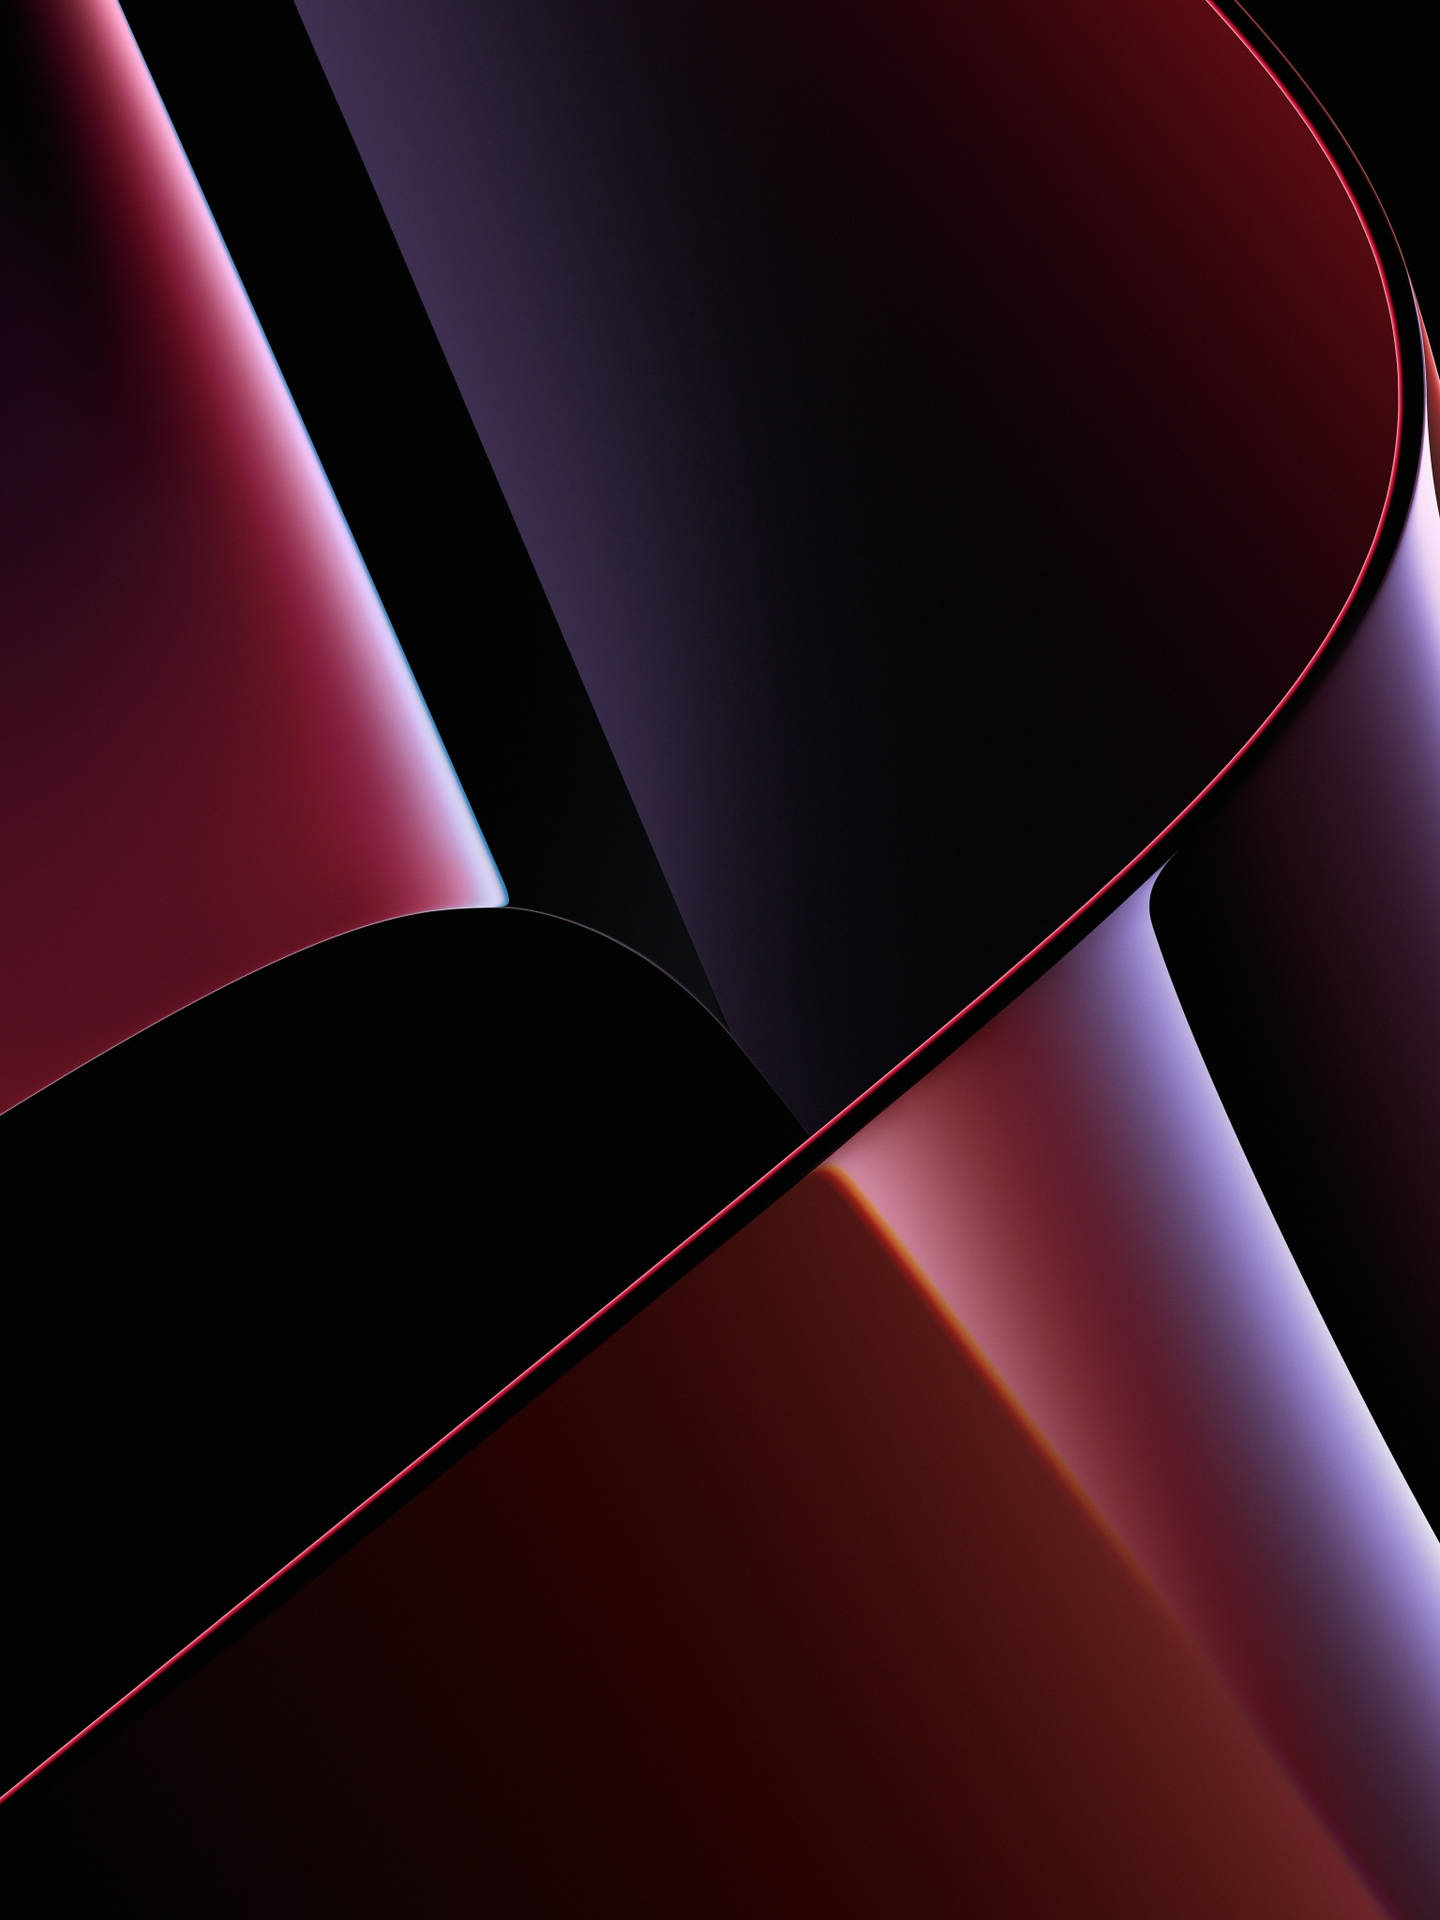 A Bright And Beautiful Modern Abstract Image Featuring Vibrant Shades Of Red And Black. Background